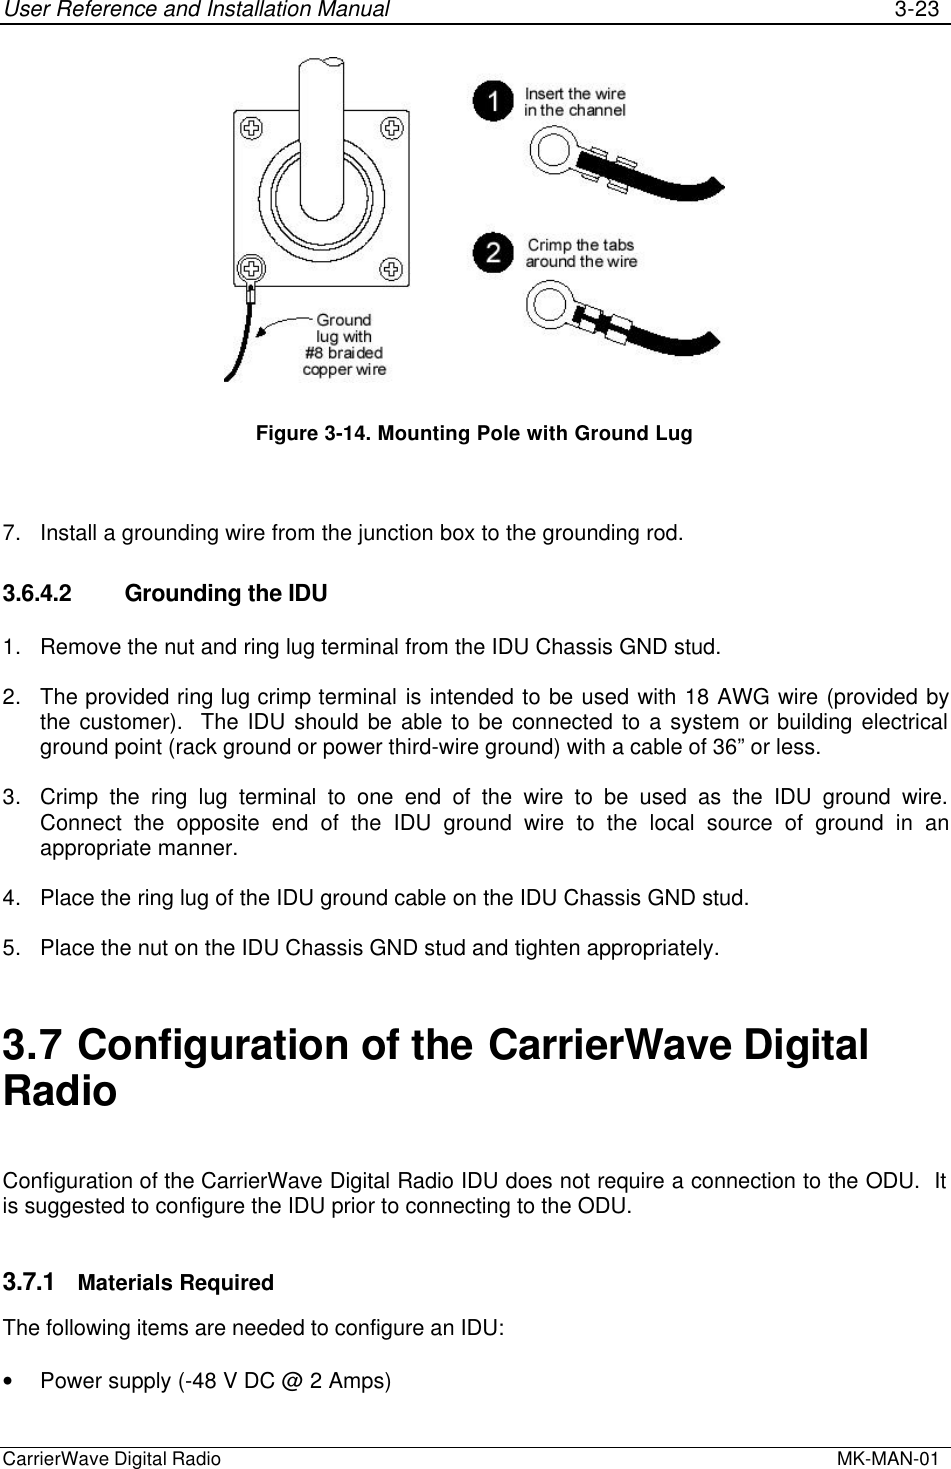 User Reference and Installation Manual 3-23CarrierWave Digital Radio  MK-MAN-01Figure 3-14. Mounting Pole with Ground Lug7. Install a grounding wire from the junction box to the grounding rod.3.6.4.2 Grounding the IDU1. Remove the nut and ring lug terminal from the IDU Chassis GND stud.2. The provided ring lug crimp terminal is intended to be used with 18 AWG wire (provided bythe customer).  The IDU should be able to be connected to a system or building electricalground point (rack ground or power third-wire ground) with a cable of 36” or less.3. Crimp the ring lug terminal to one end of the wire to be used as the IDU ground wire.Connect the opposite end of the IDU ground wire to the local source of ground in anappropriate manner.4. Place the ring lug of the IDU ground cable on the IDU Chassis GND stud.5. Place the nut on the IDU Chassis GND stud and tighten appropriately.3.7 Configuration of the CarrierWave DigitalRadioConfiguration of the CarrierWave Digital Radio IDU does not require a connection to the ODU.  Itis suggested to configure the IDU prior to connecting to the ODU.3.7.1 Materials RequiredThe following items are needed to configure an IDU:• Power supply (-48 V DC @ 2 Amps)